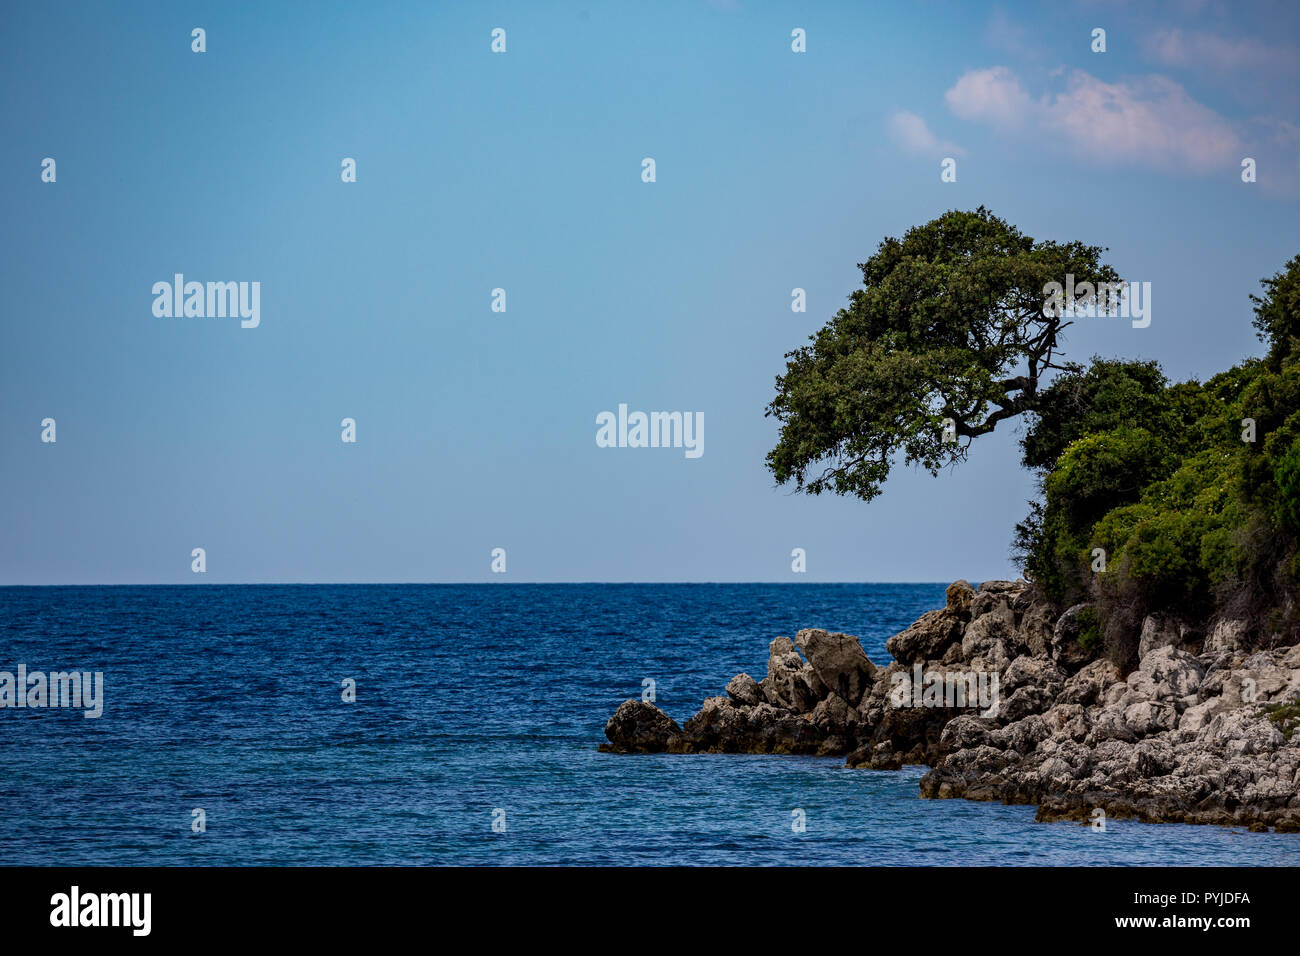 Spring daytime beautiful Ionian Sea with clear turquoise water, rocks and trees coast view from Ksamil beach, Albania. Deep blue sky with white clouds. Stock Photo